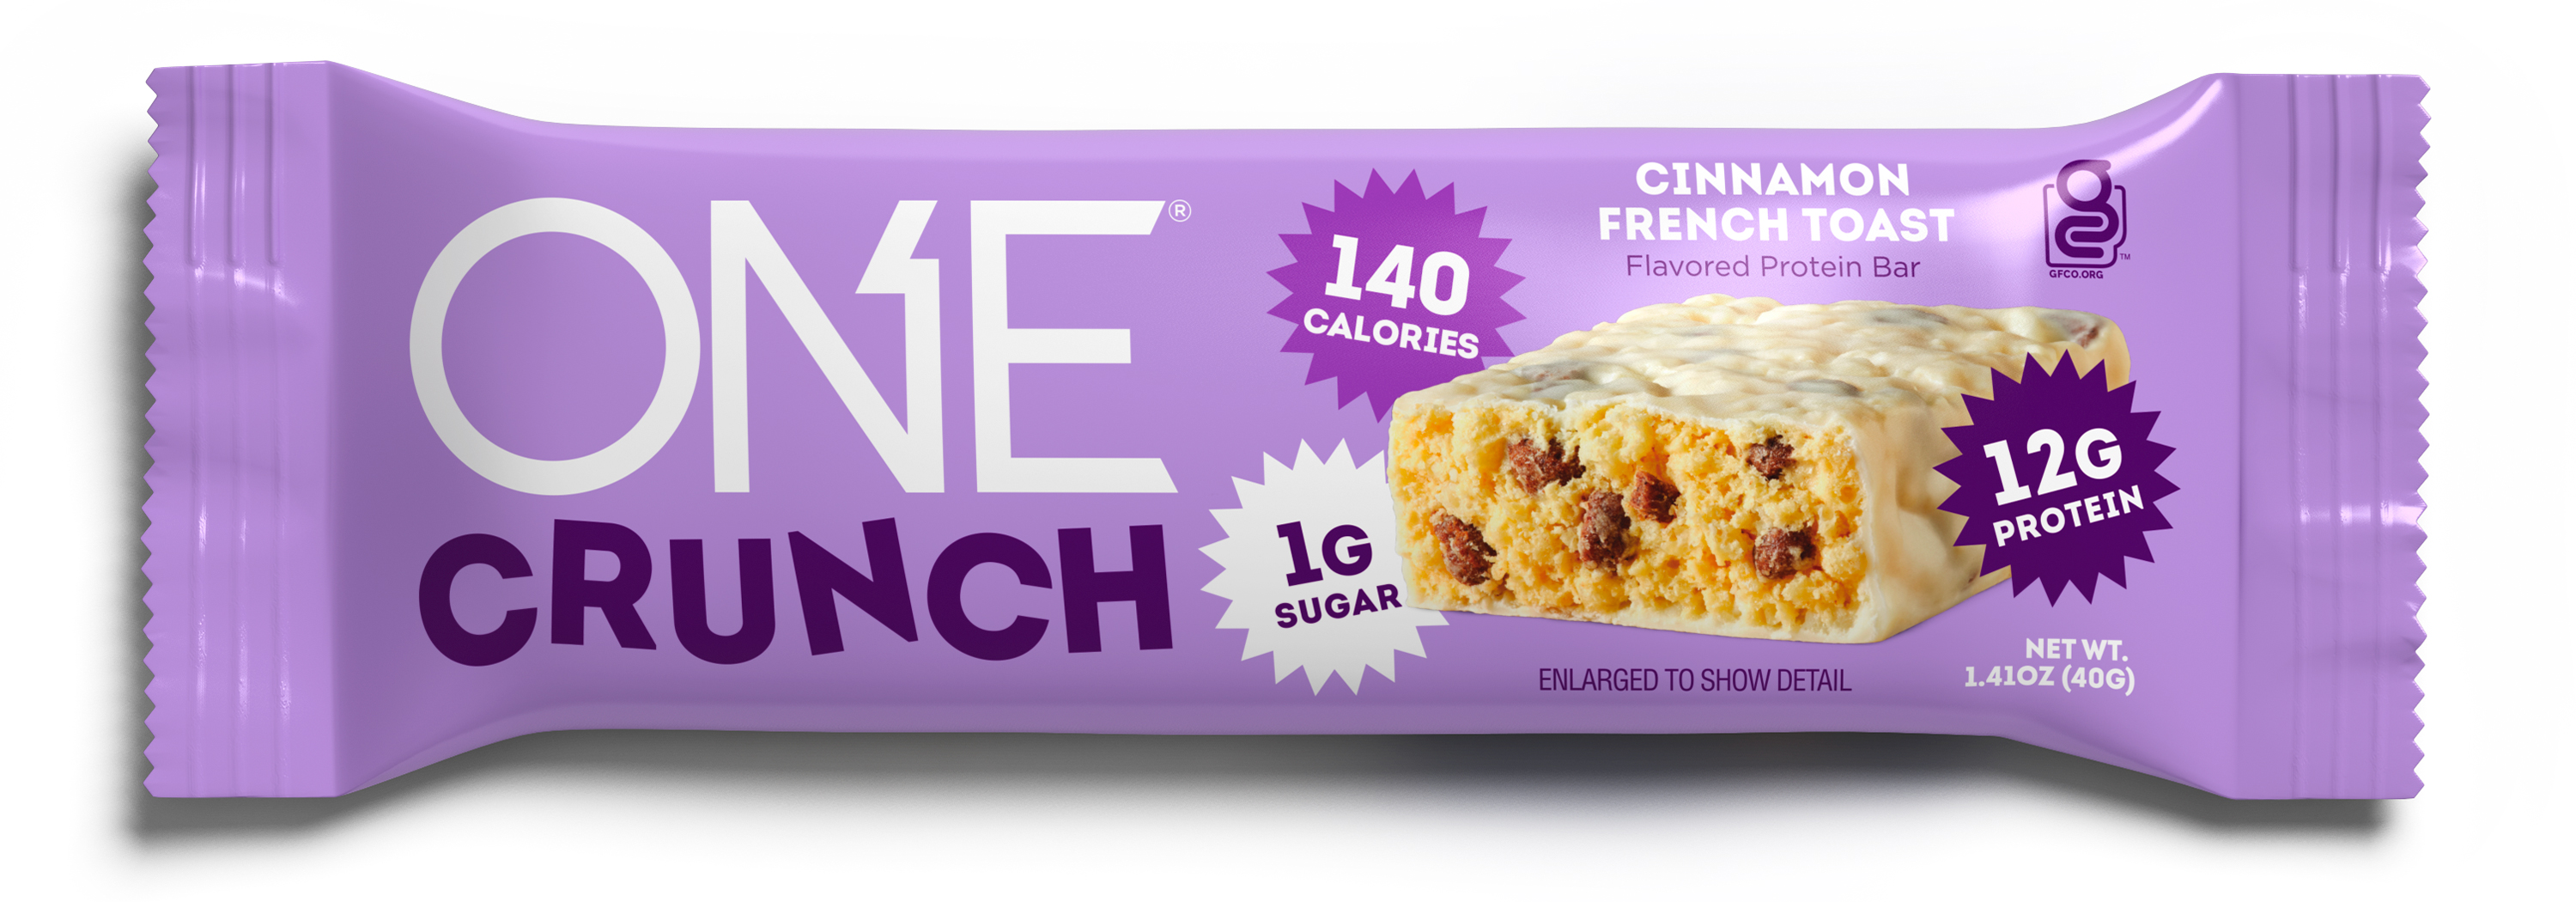 One Crunch Protein Bar, Cinnamon French Toast, 12g Protein, 4 Ct - image 2 of 7